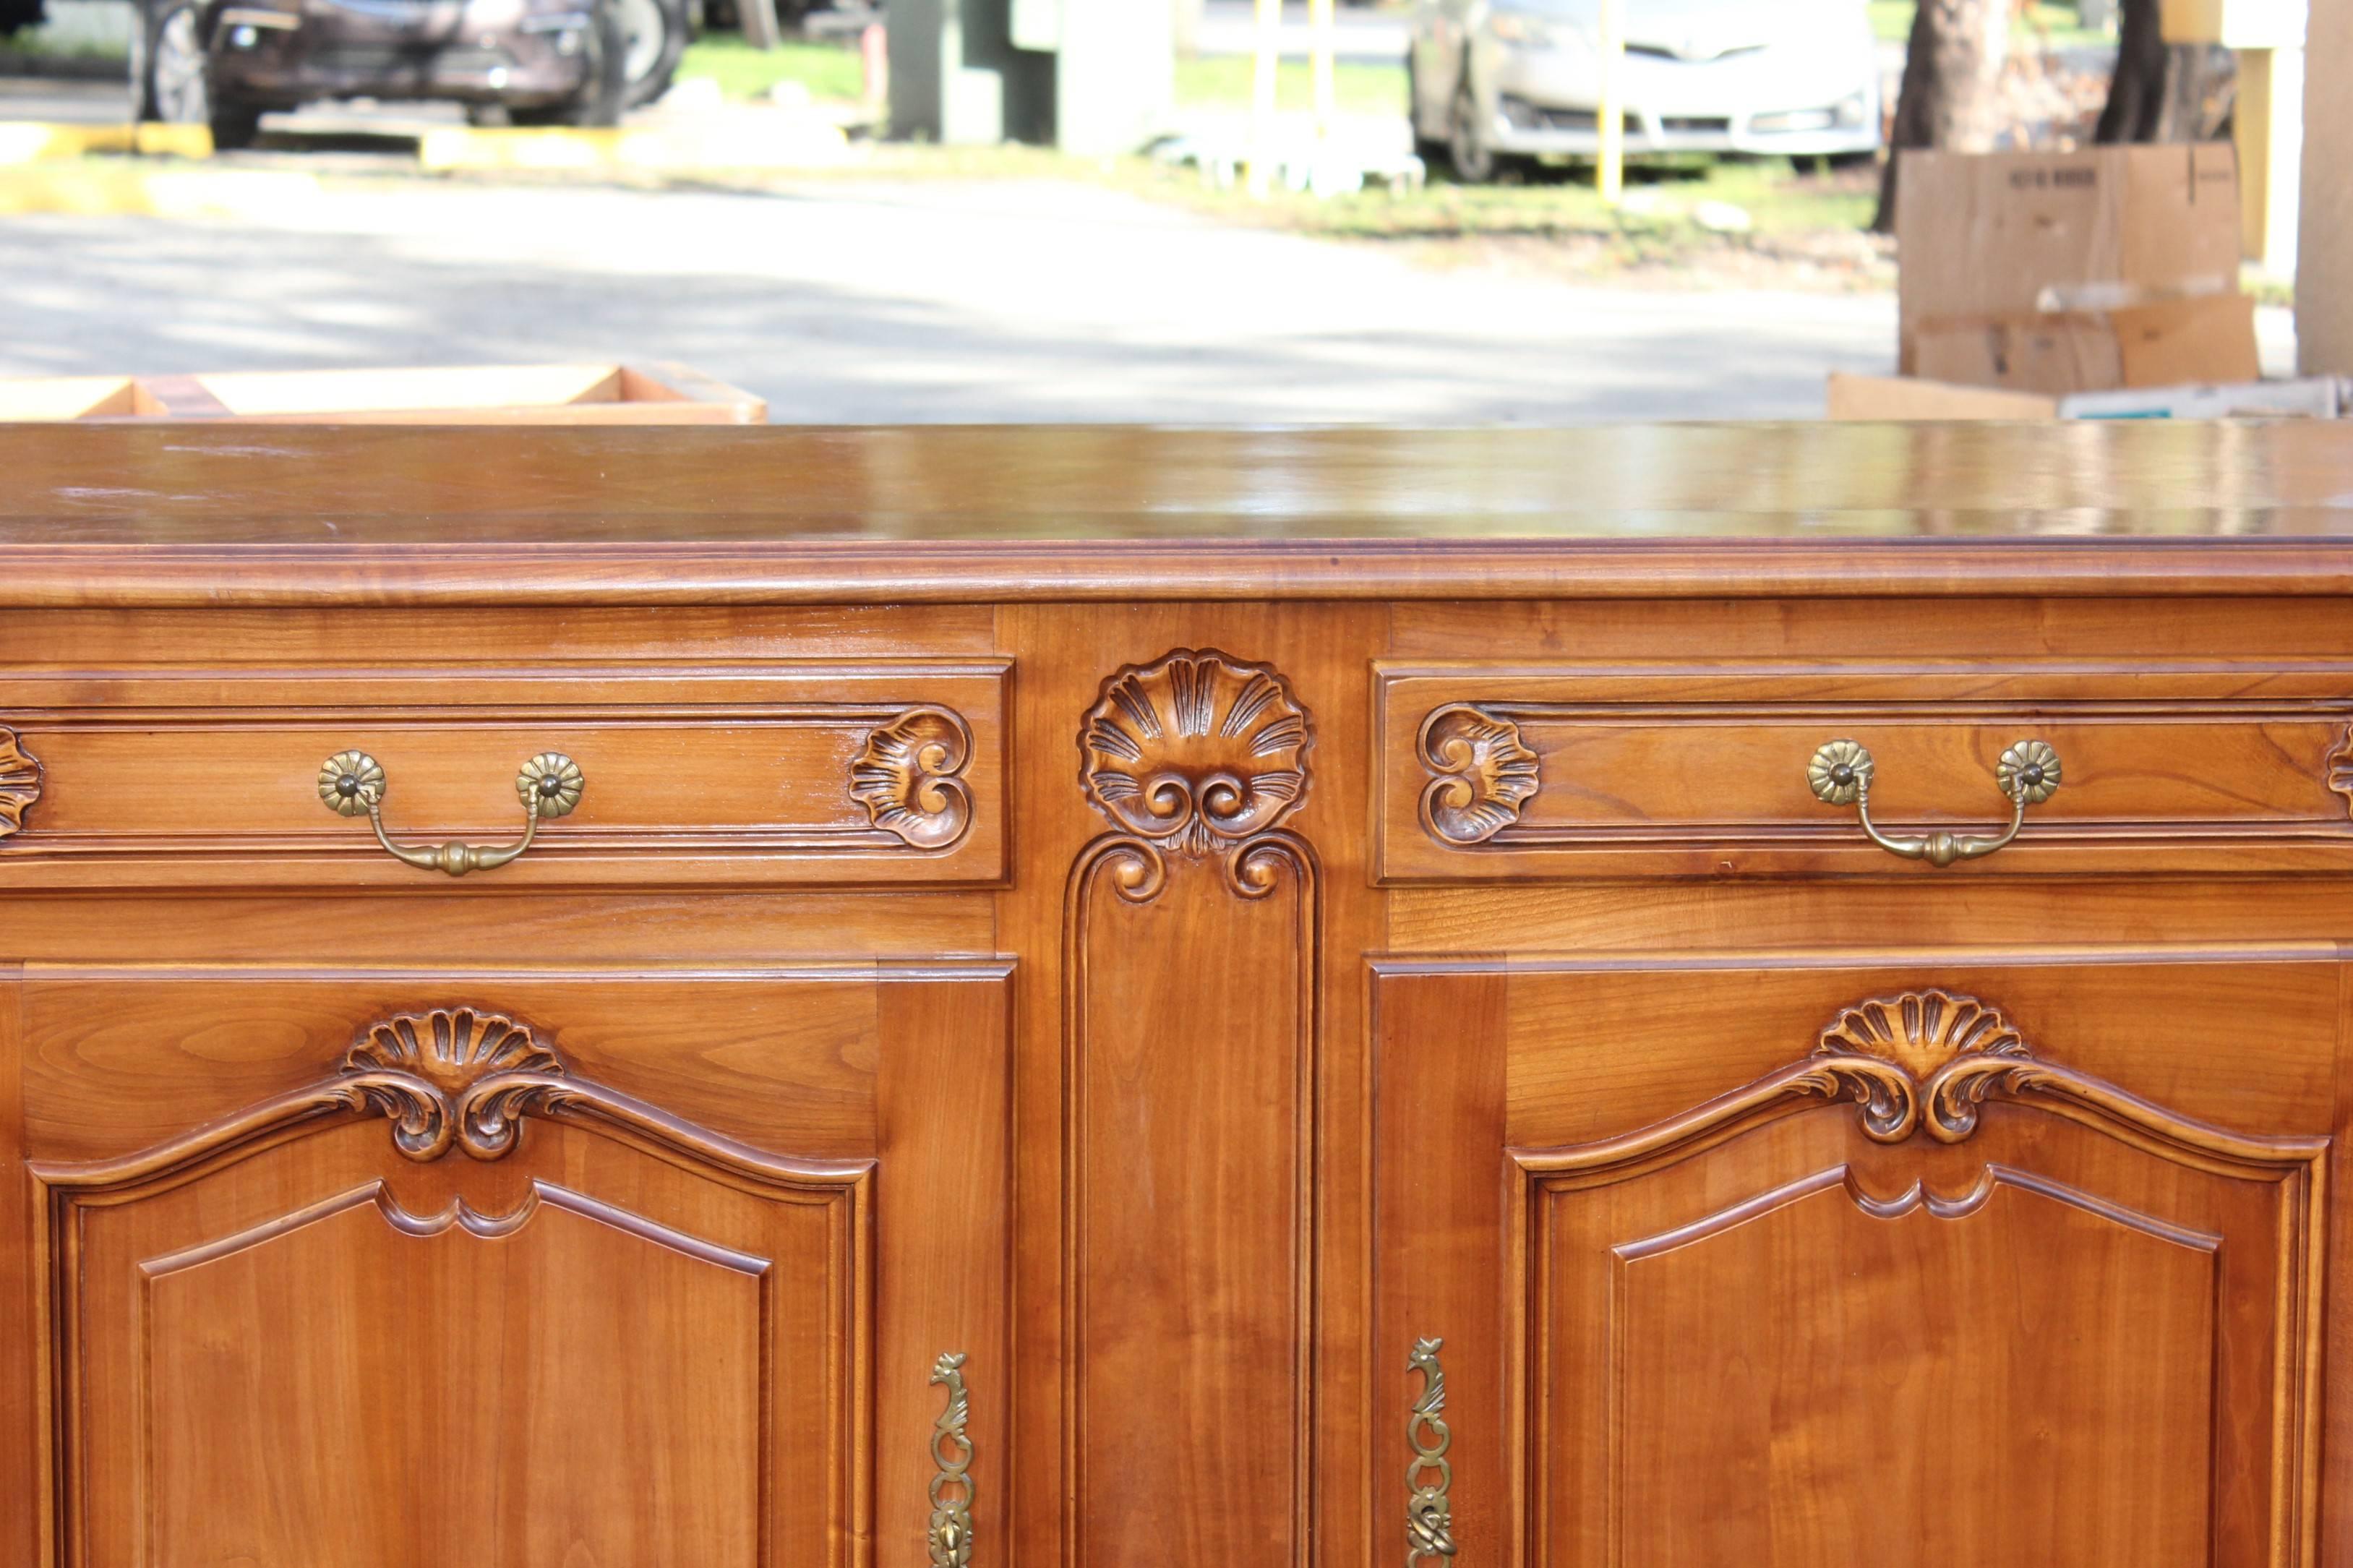 Early 20th Century French Antique 19th Century Provencal Louis XV Sideboard or Buffet Demilune